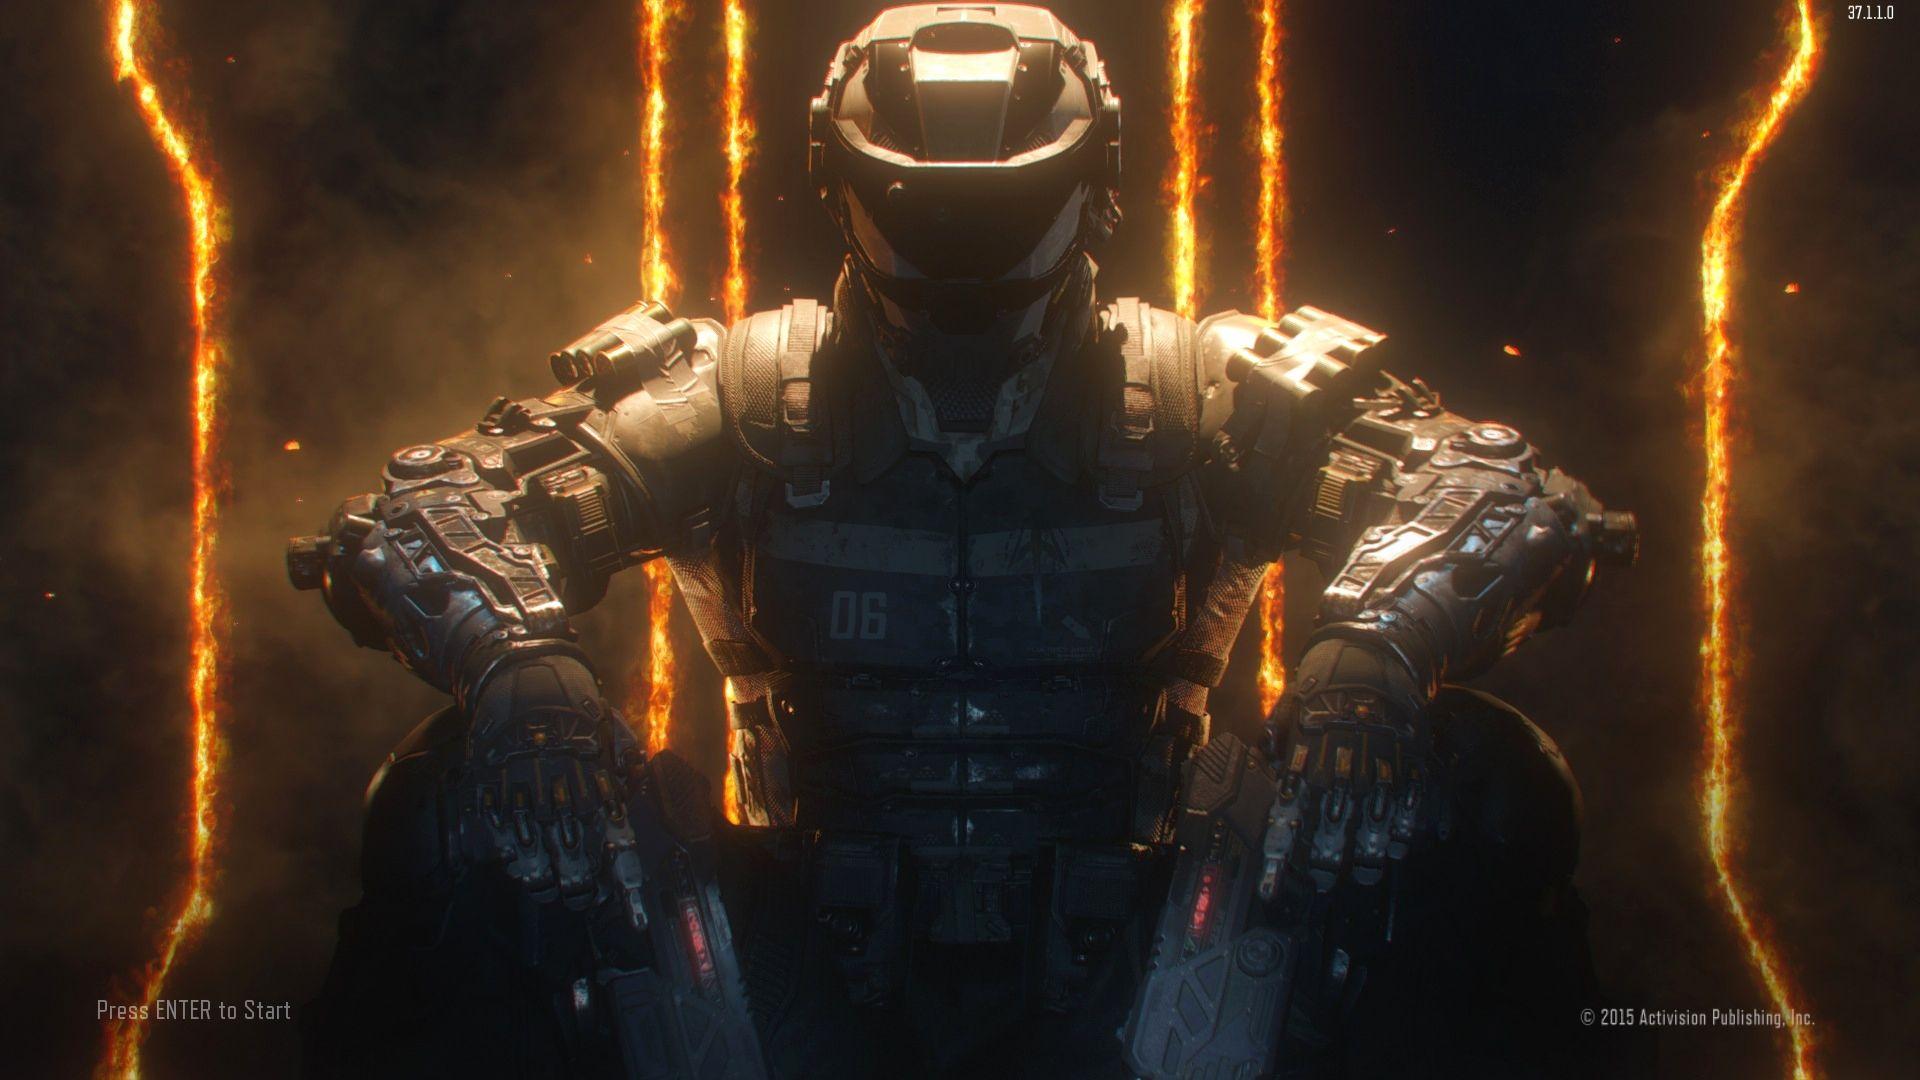 phone x call of duty black ops 4 background